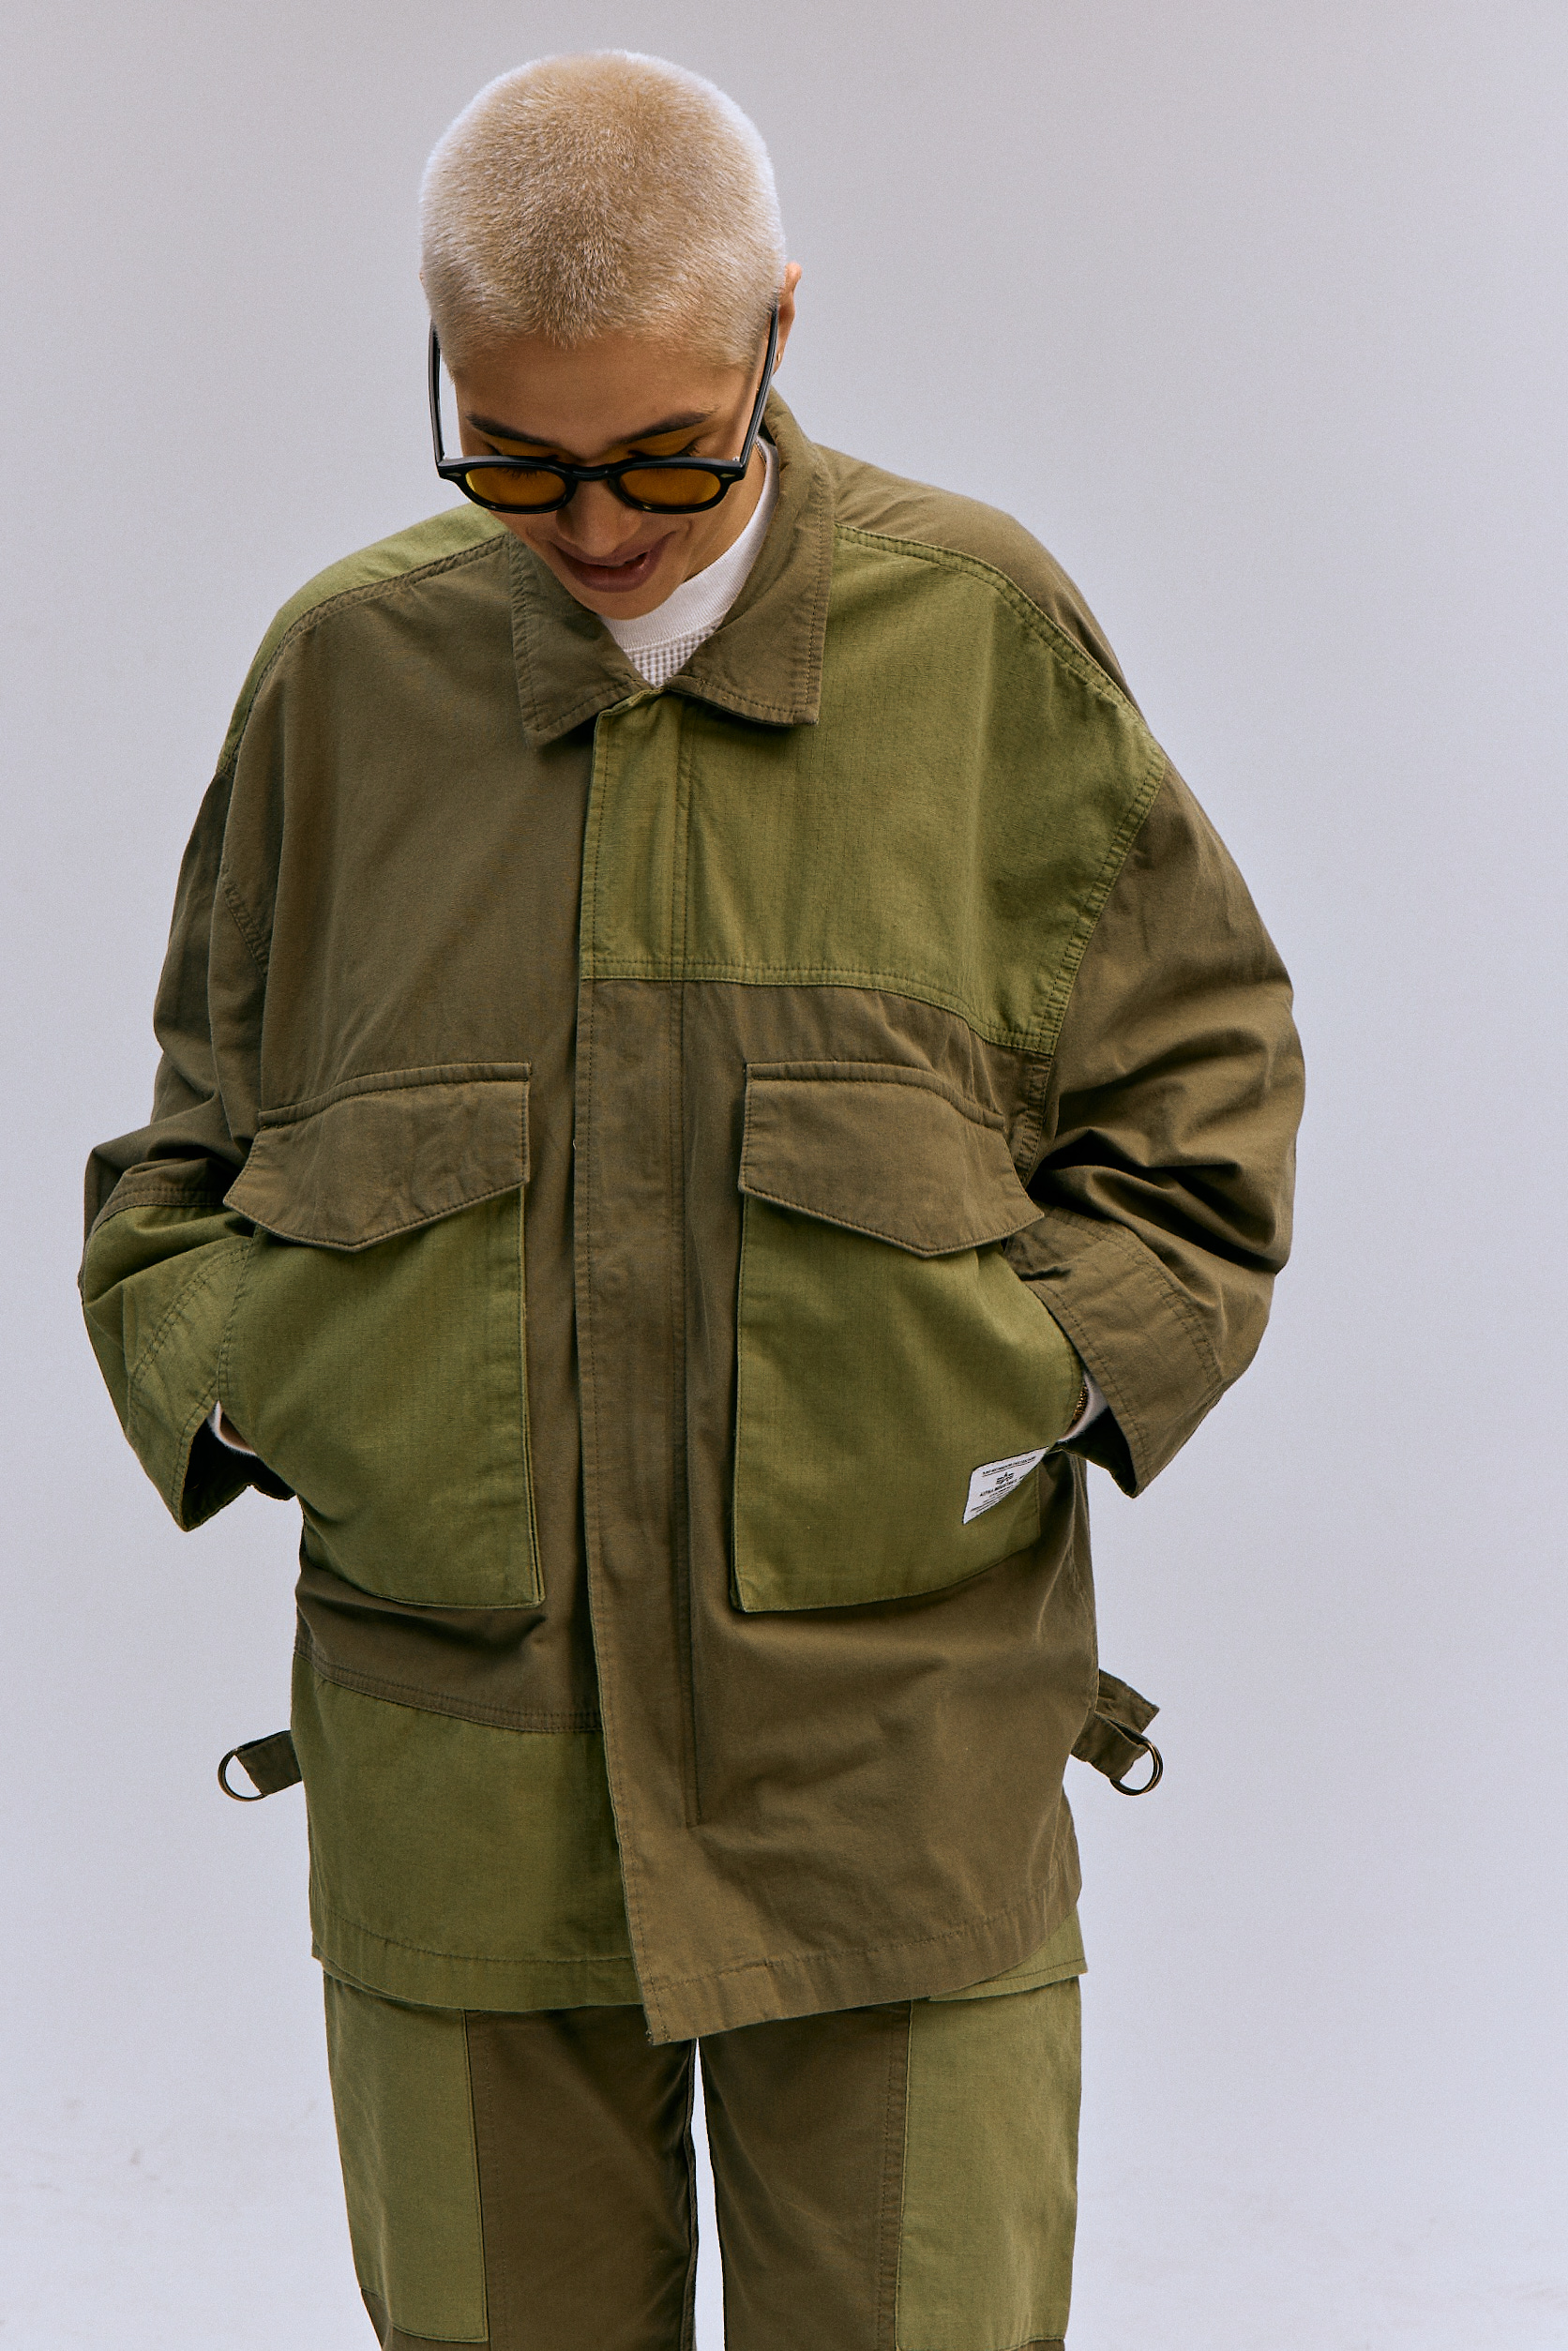 Alpha Industries SS24 collection bombers